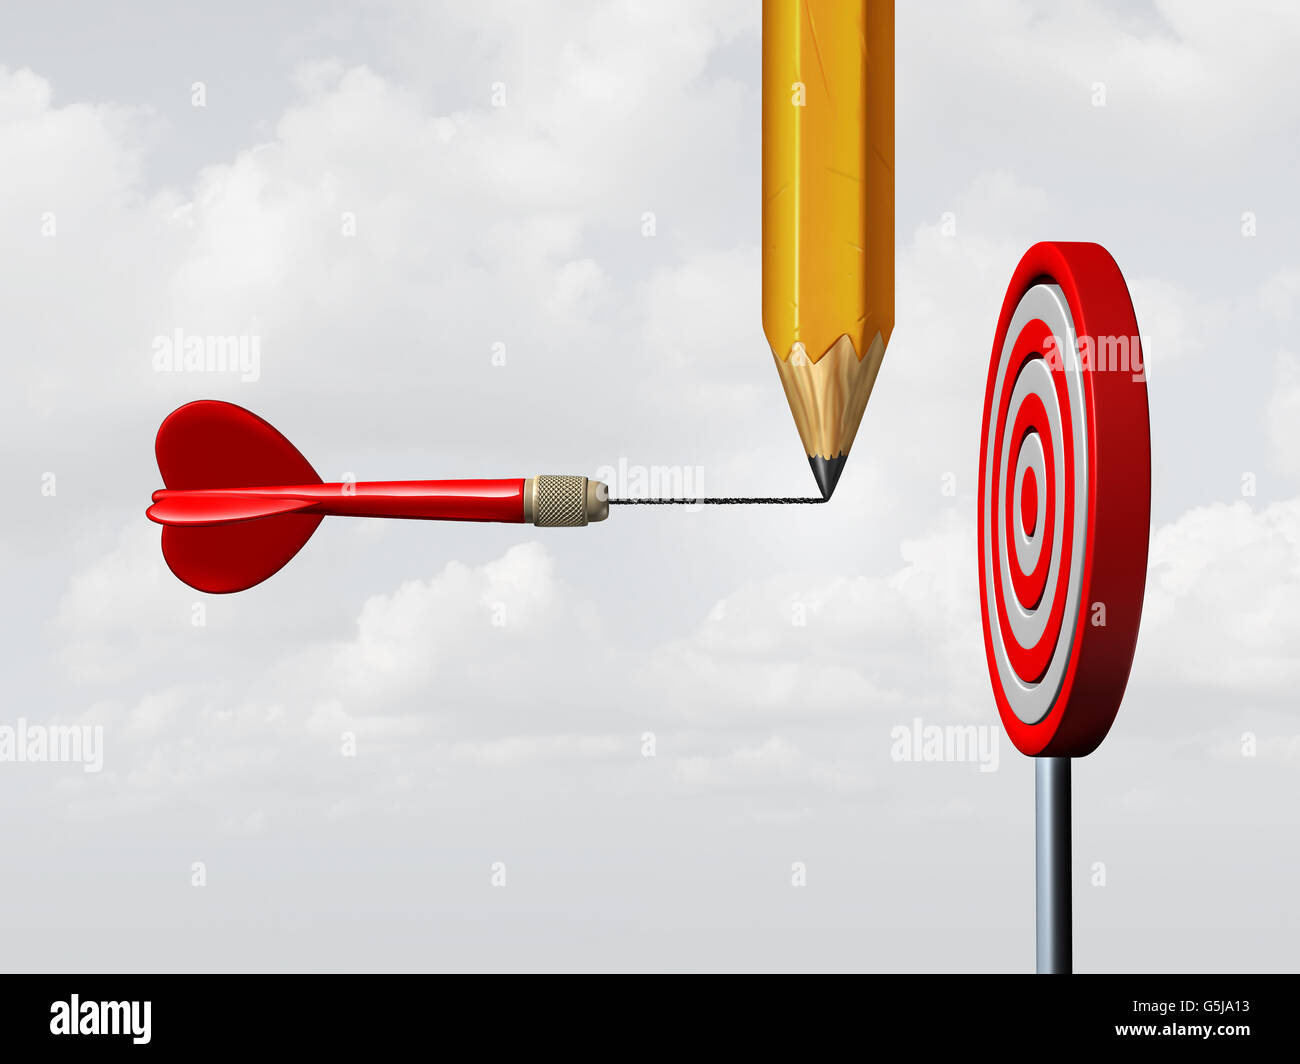 Success consulting concept and business marketing advice system as a pencil drawing on a flying dart an extended target needle straight towards a focused goal as a motivation and achievement metaphor with 3D illustration elements. Stock Photo